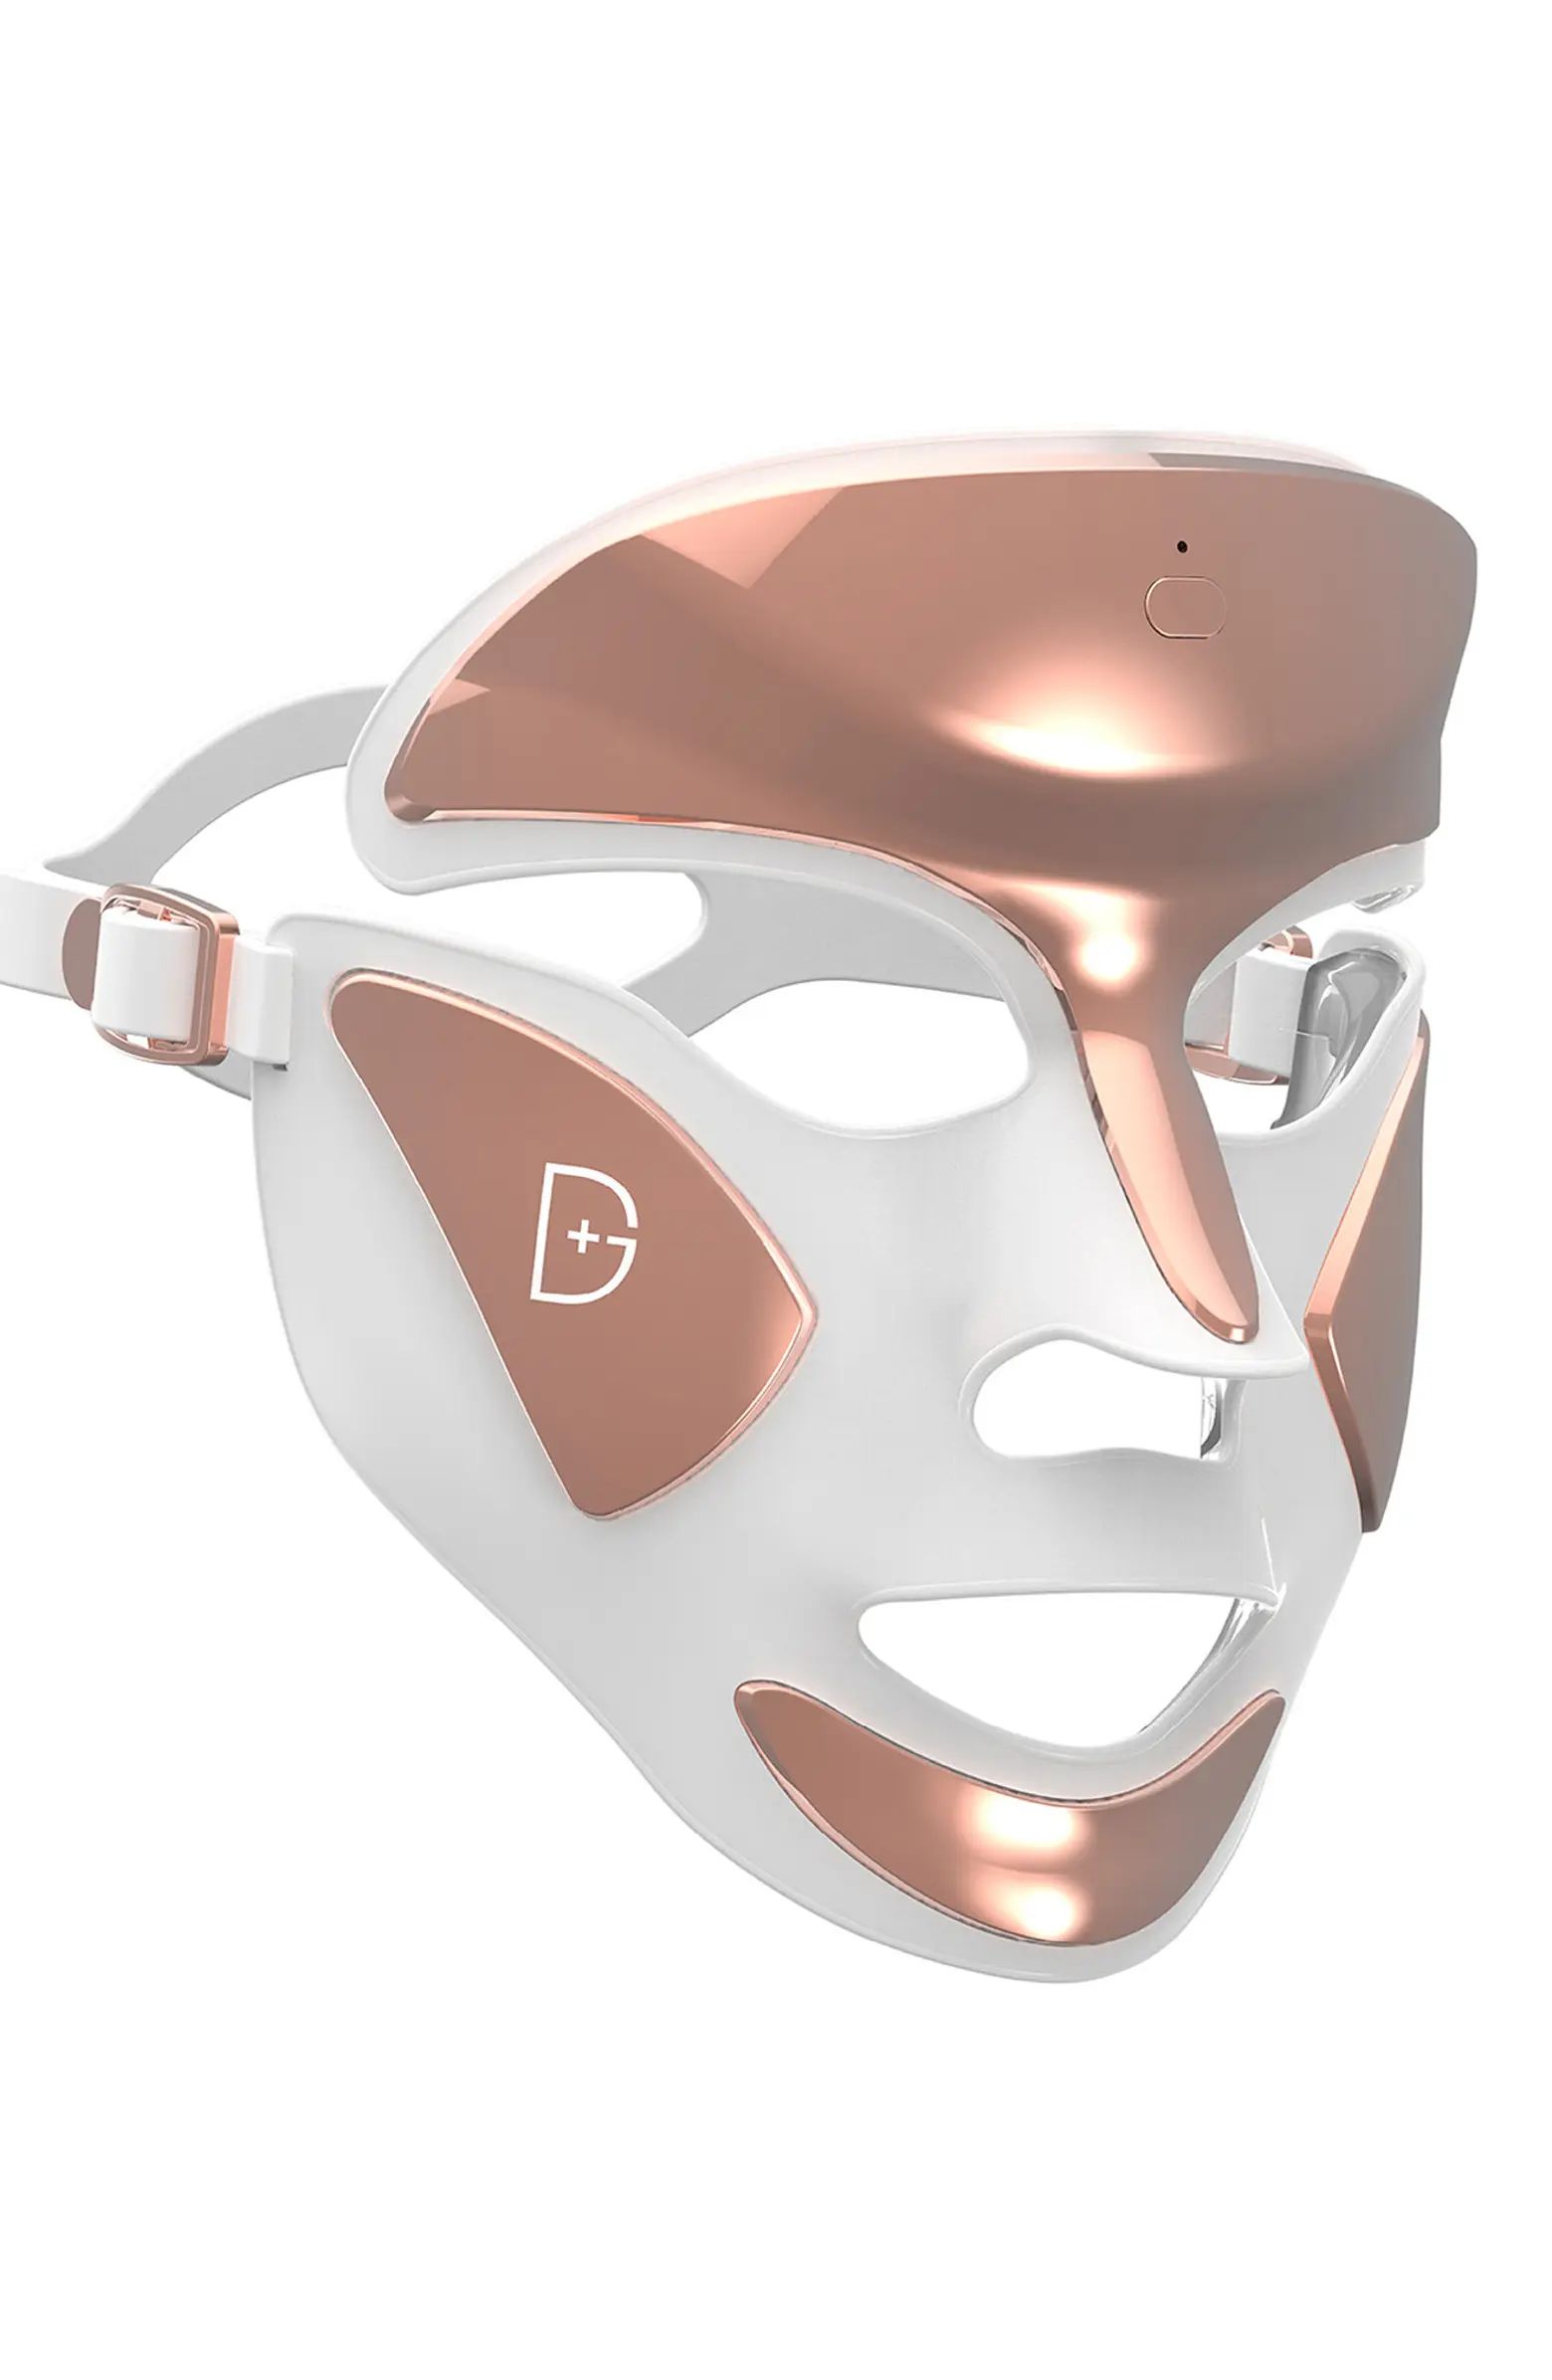 DRx SpectraLite™ FaceWare Pro LED Light Therapy Device | Nordstrom